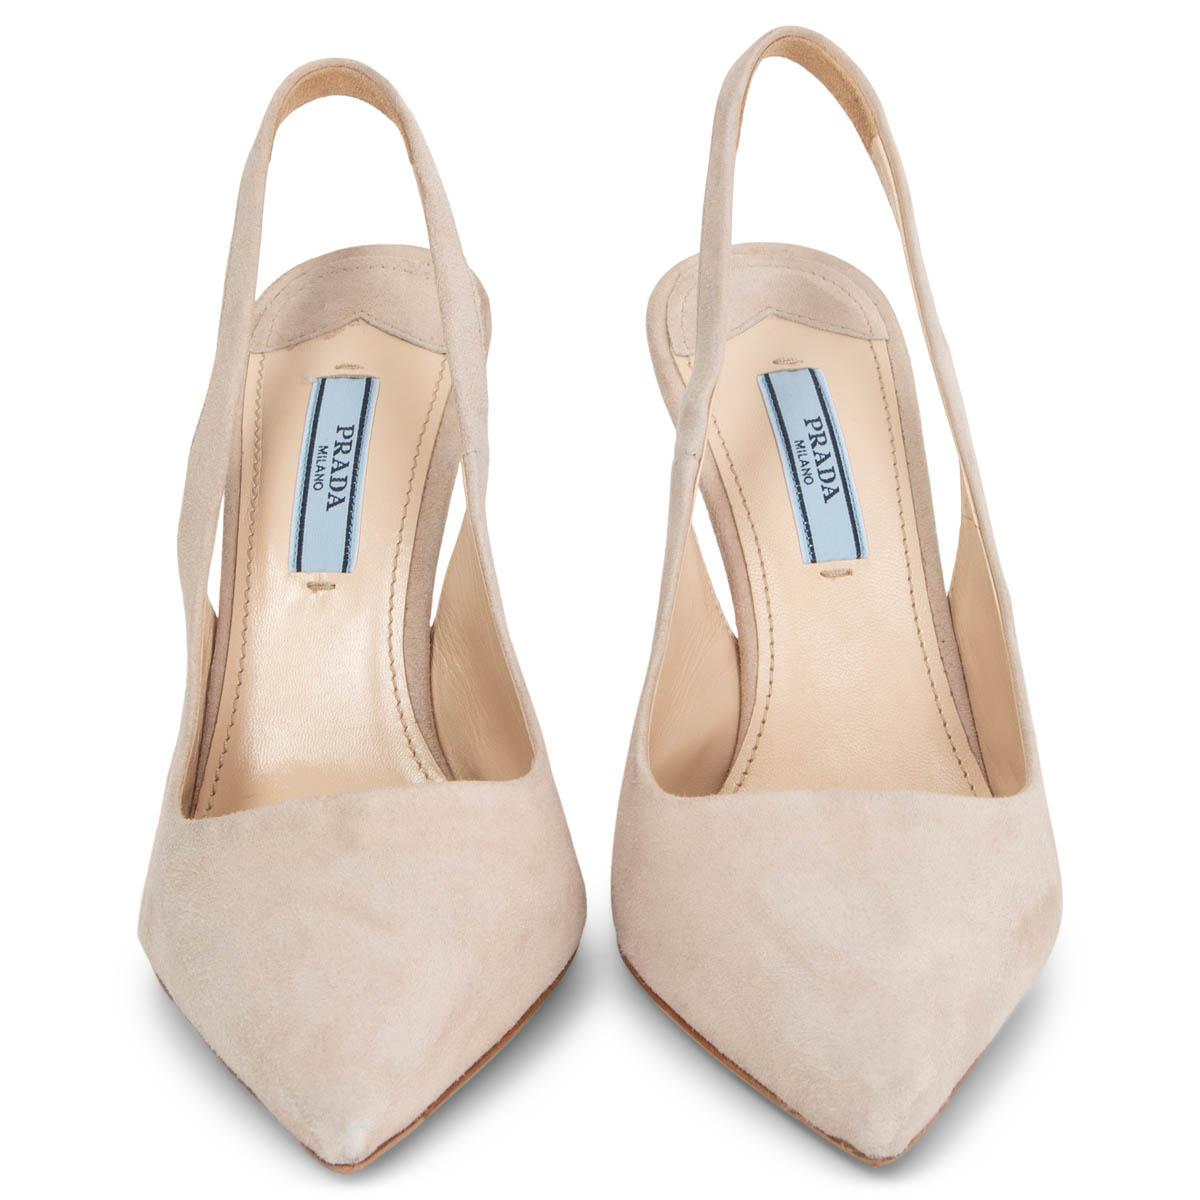 100% authentic Prada pointed-toe slingbacks in pale nude suede. Brand new. 

Measurements
Imprinted Size	36.5
Shoe Size	36.5
Inside Sole	23.5cm (9.2in)
Width	7.5cm (2.9in)
Heel	11cm (4.3in)

All our listings include only the listed item unless